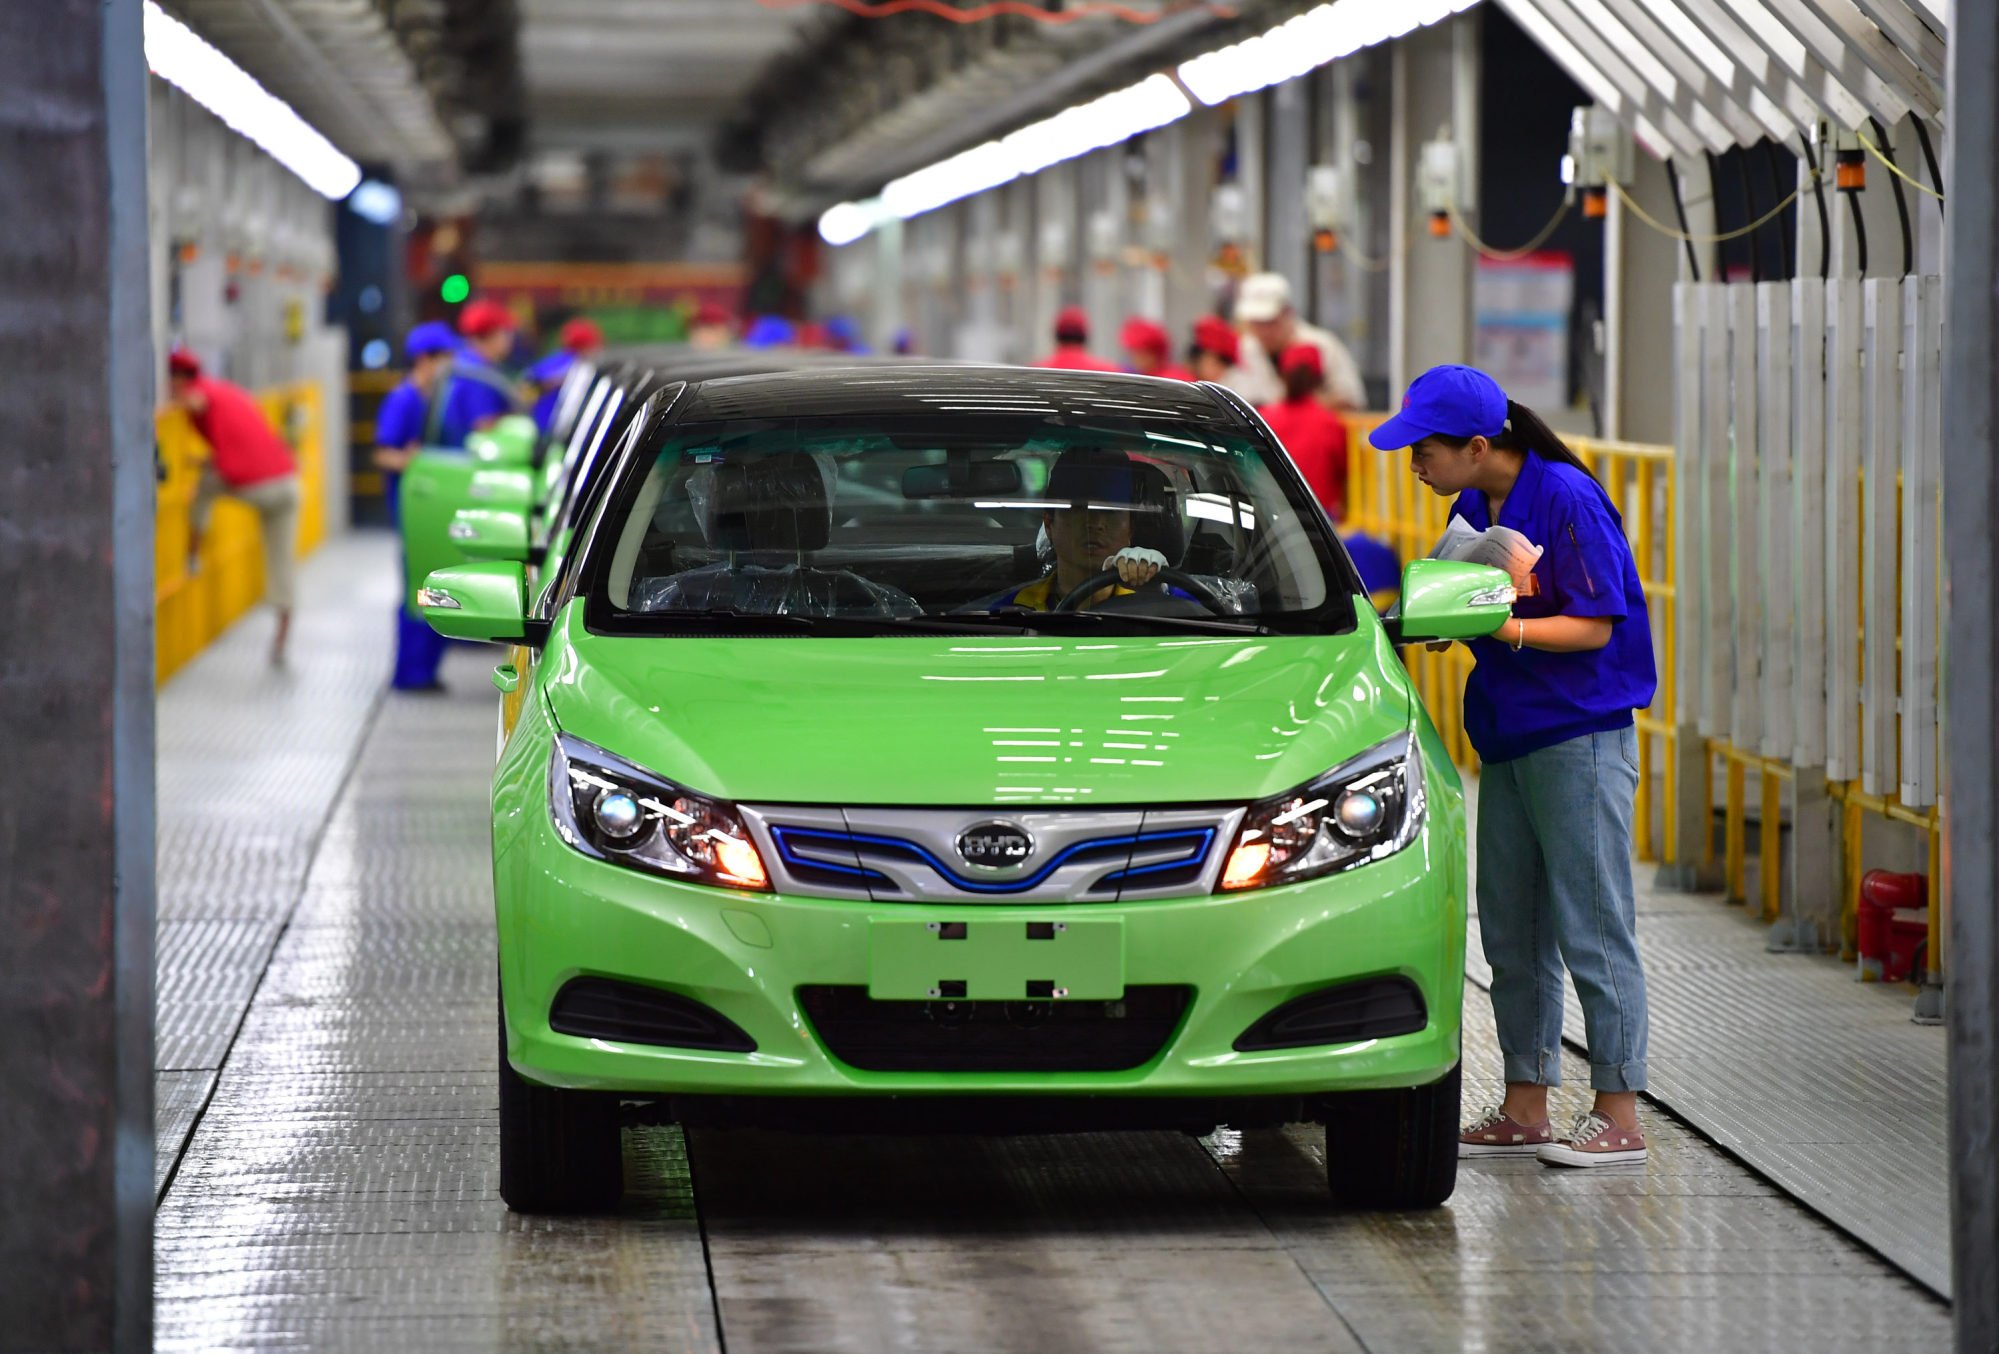 Workers check BYD electric cars on a manufacturing line in Xian in northwest China’s Shaanxi province in 2019. Photo: Xinhua